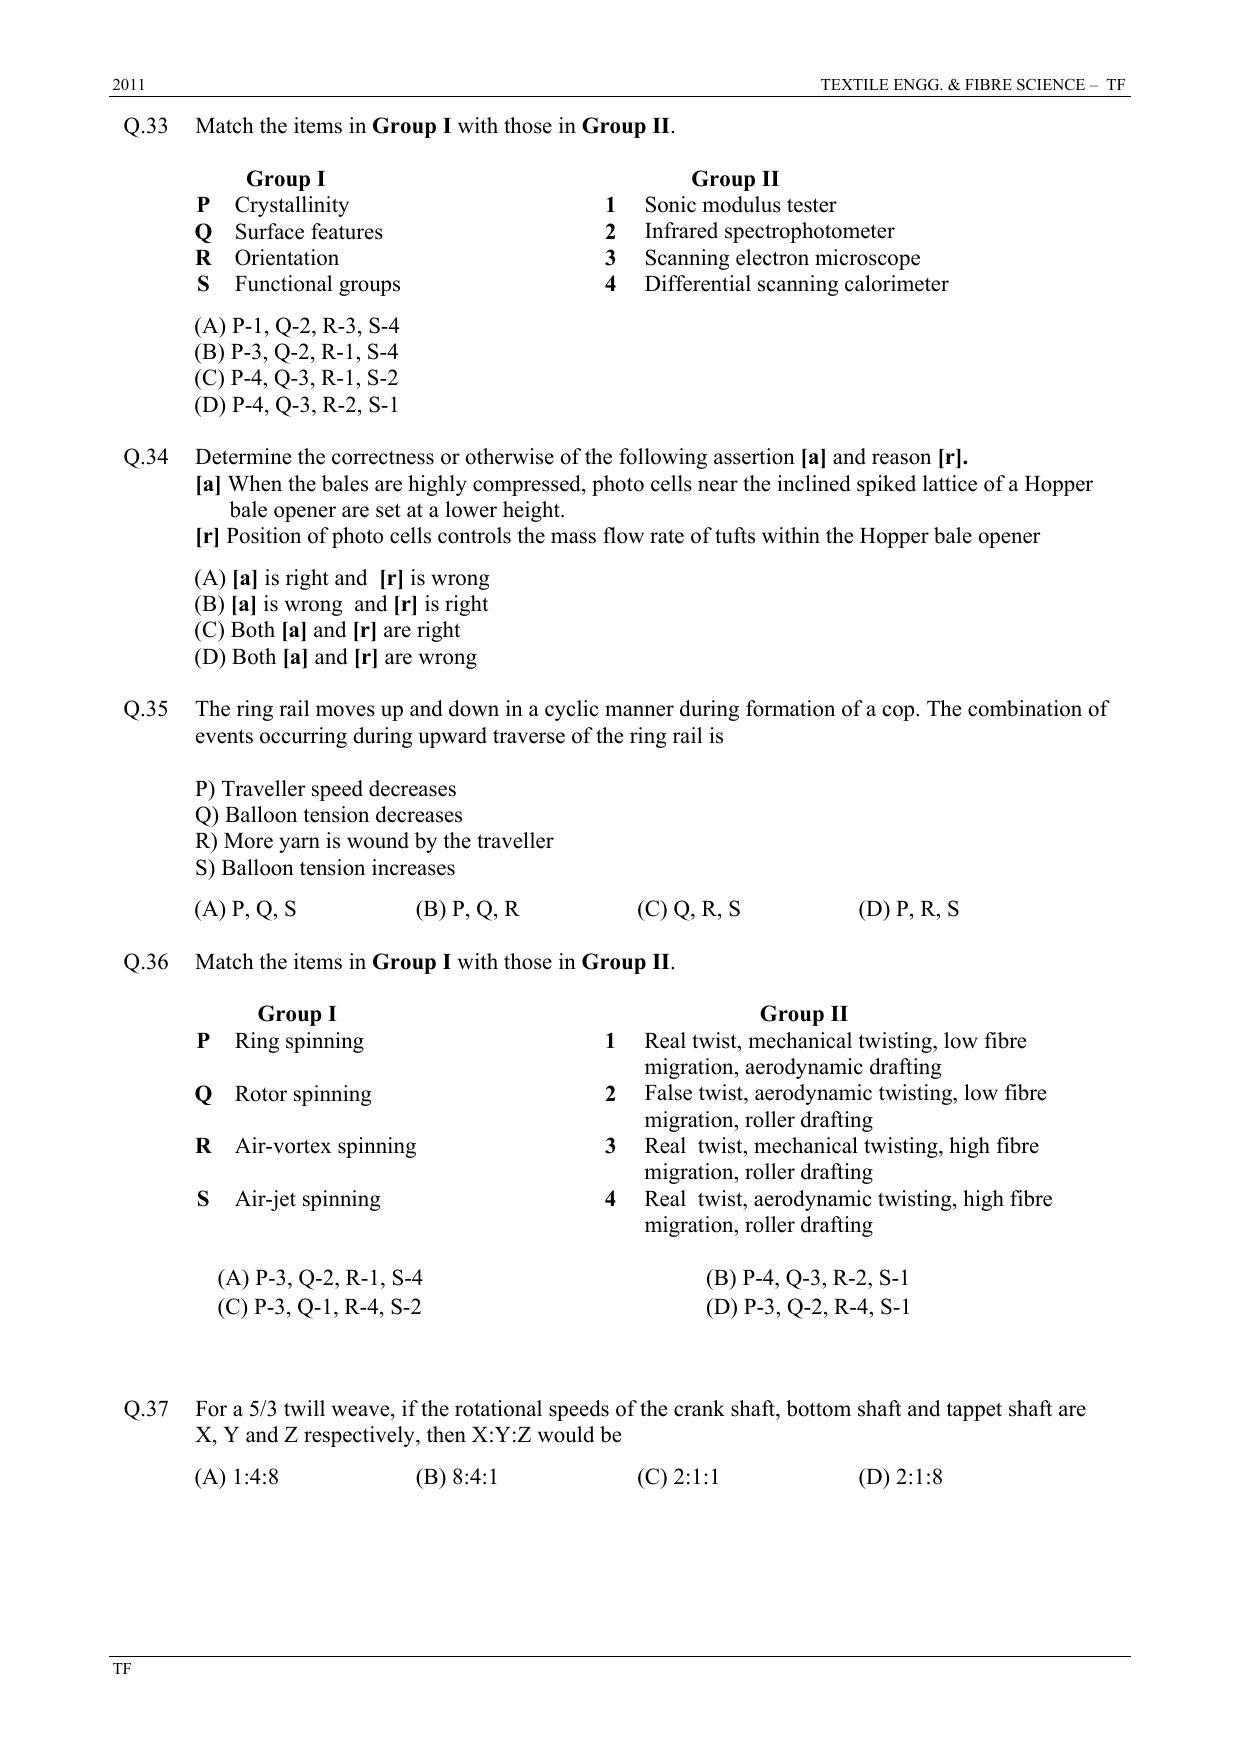 GATE 2011 Textile Engineering and Fibre Science (TF) Question Paper with Answer Key - Page 6